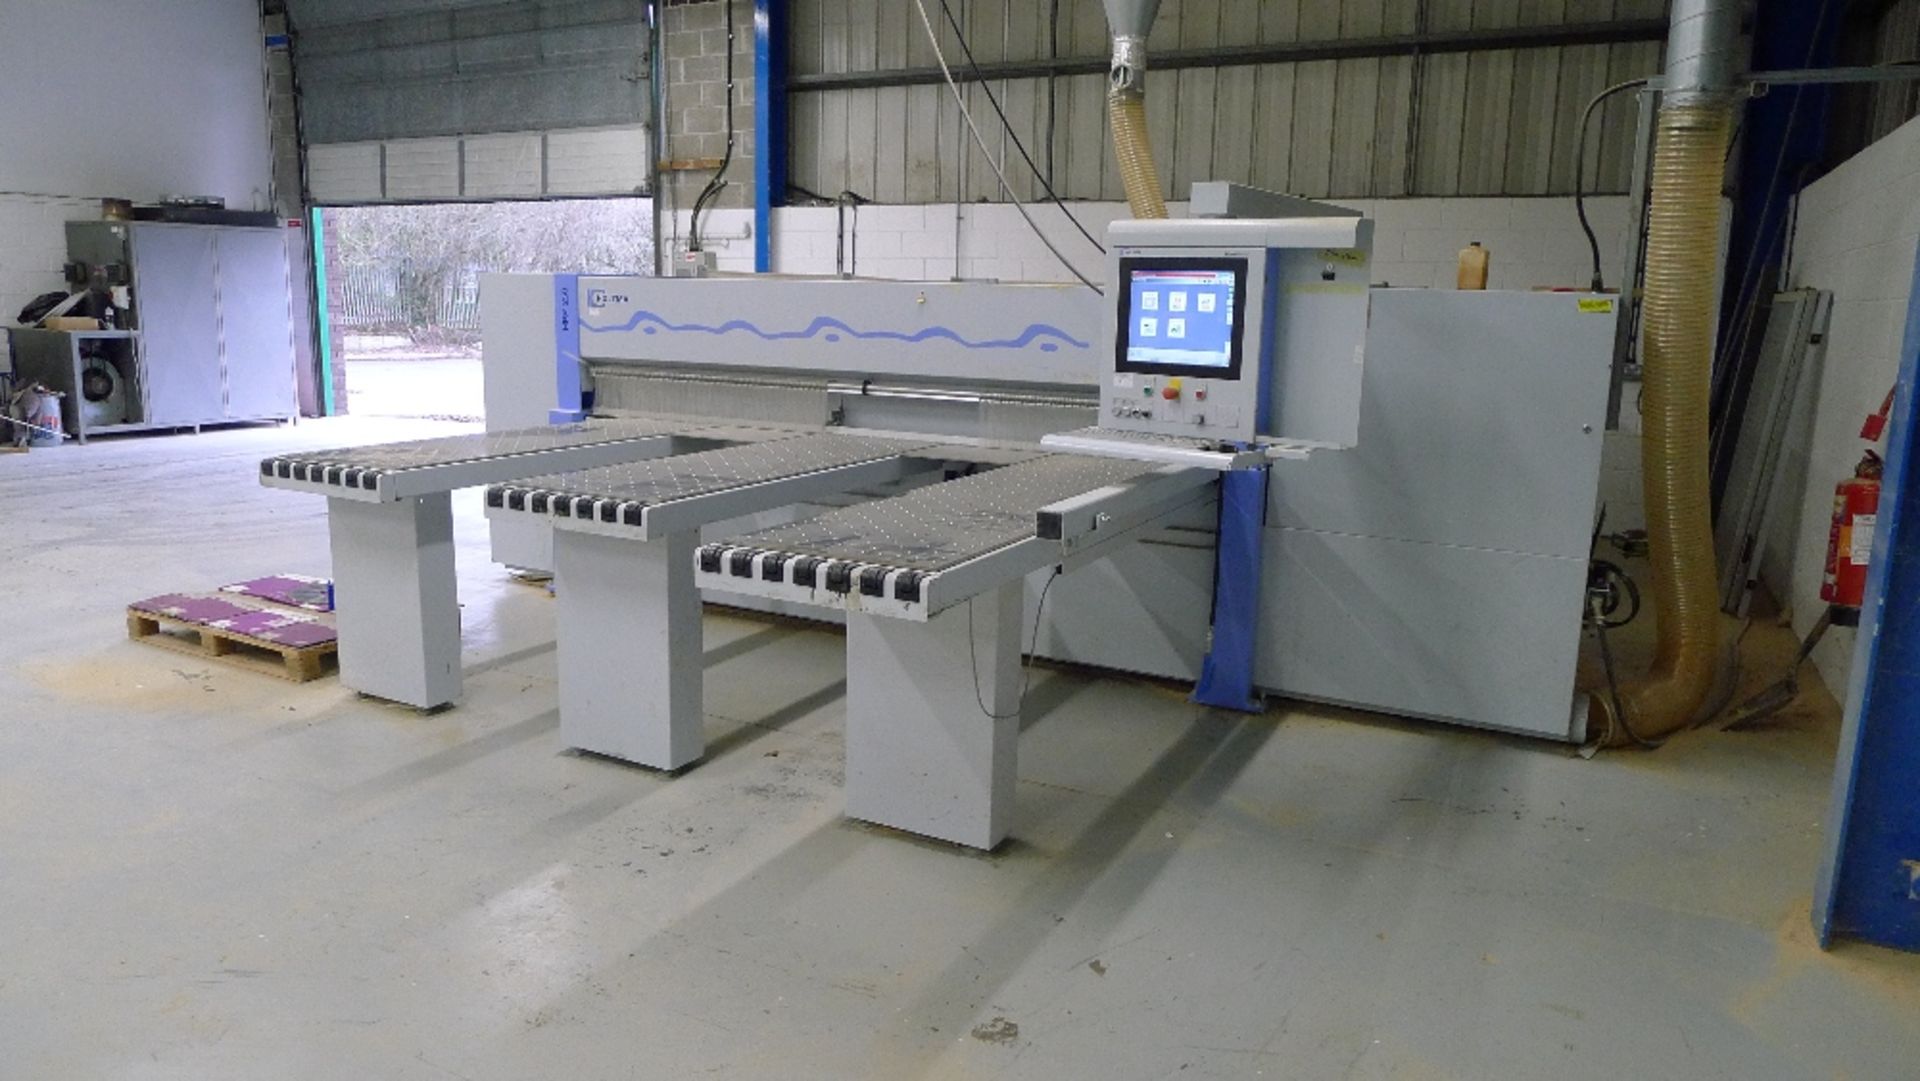 1 CNC Horizontal panel saw with pressure beam by Holzma type Optimat HPP 250/31/31, s/n 0-341-07- - Image 2 of 11